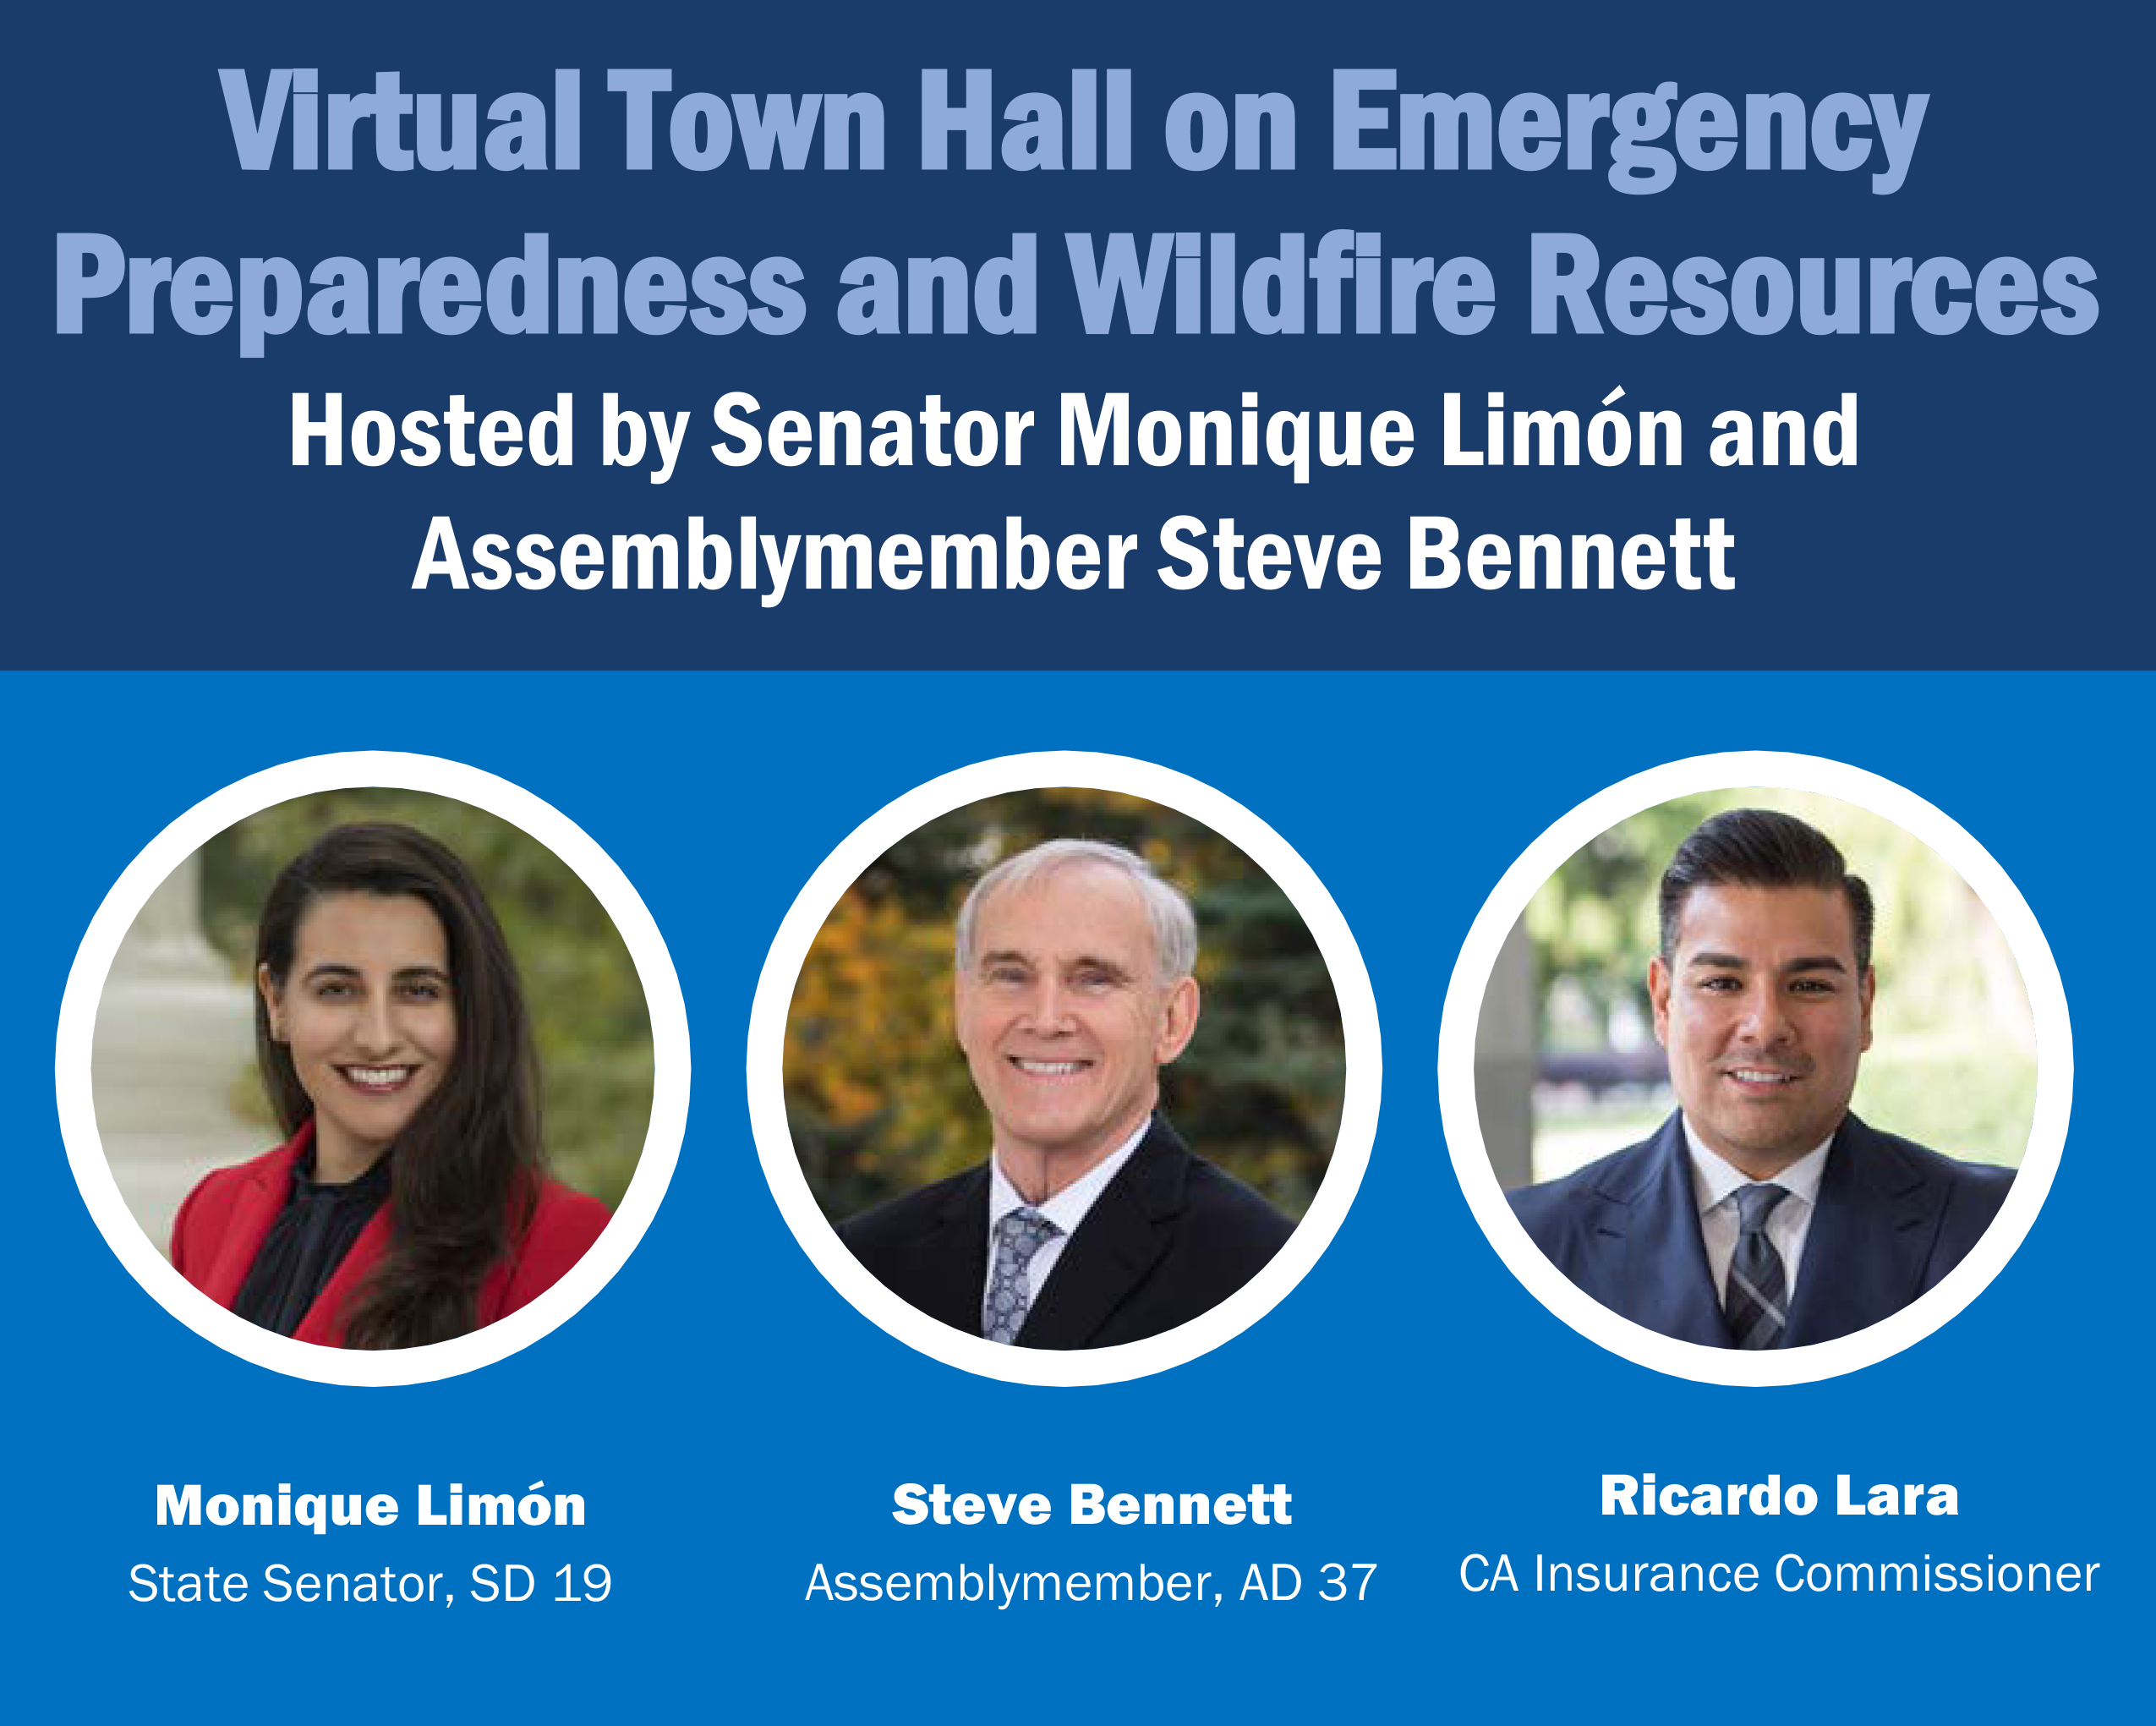 Virtual Town Hall on Emergency Preparedness and Wildfire Resources Hosted by Senator Monique Limón, Assemblymember Steve Bennett and Commissioner Ricardo Lara.